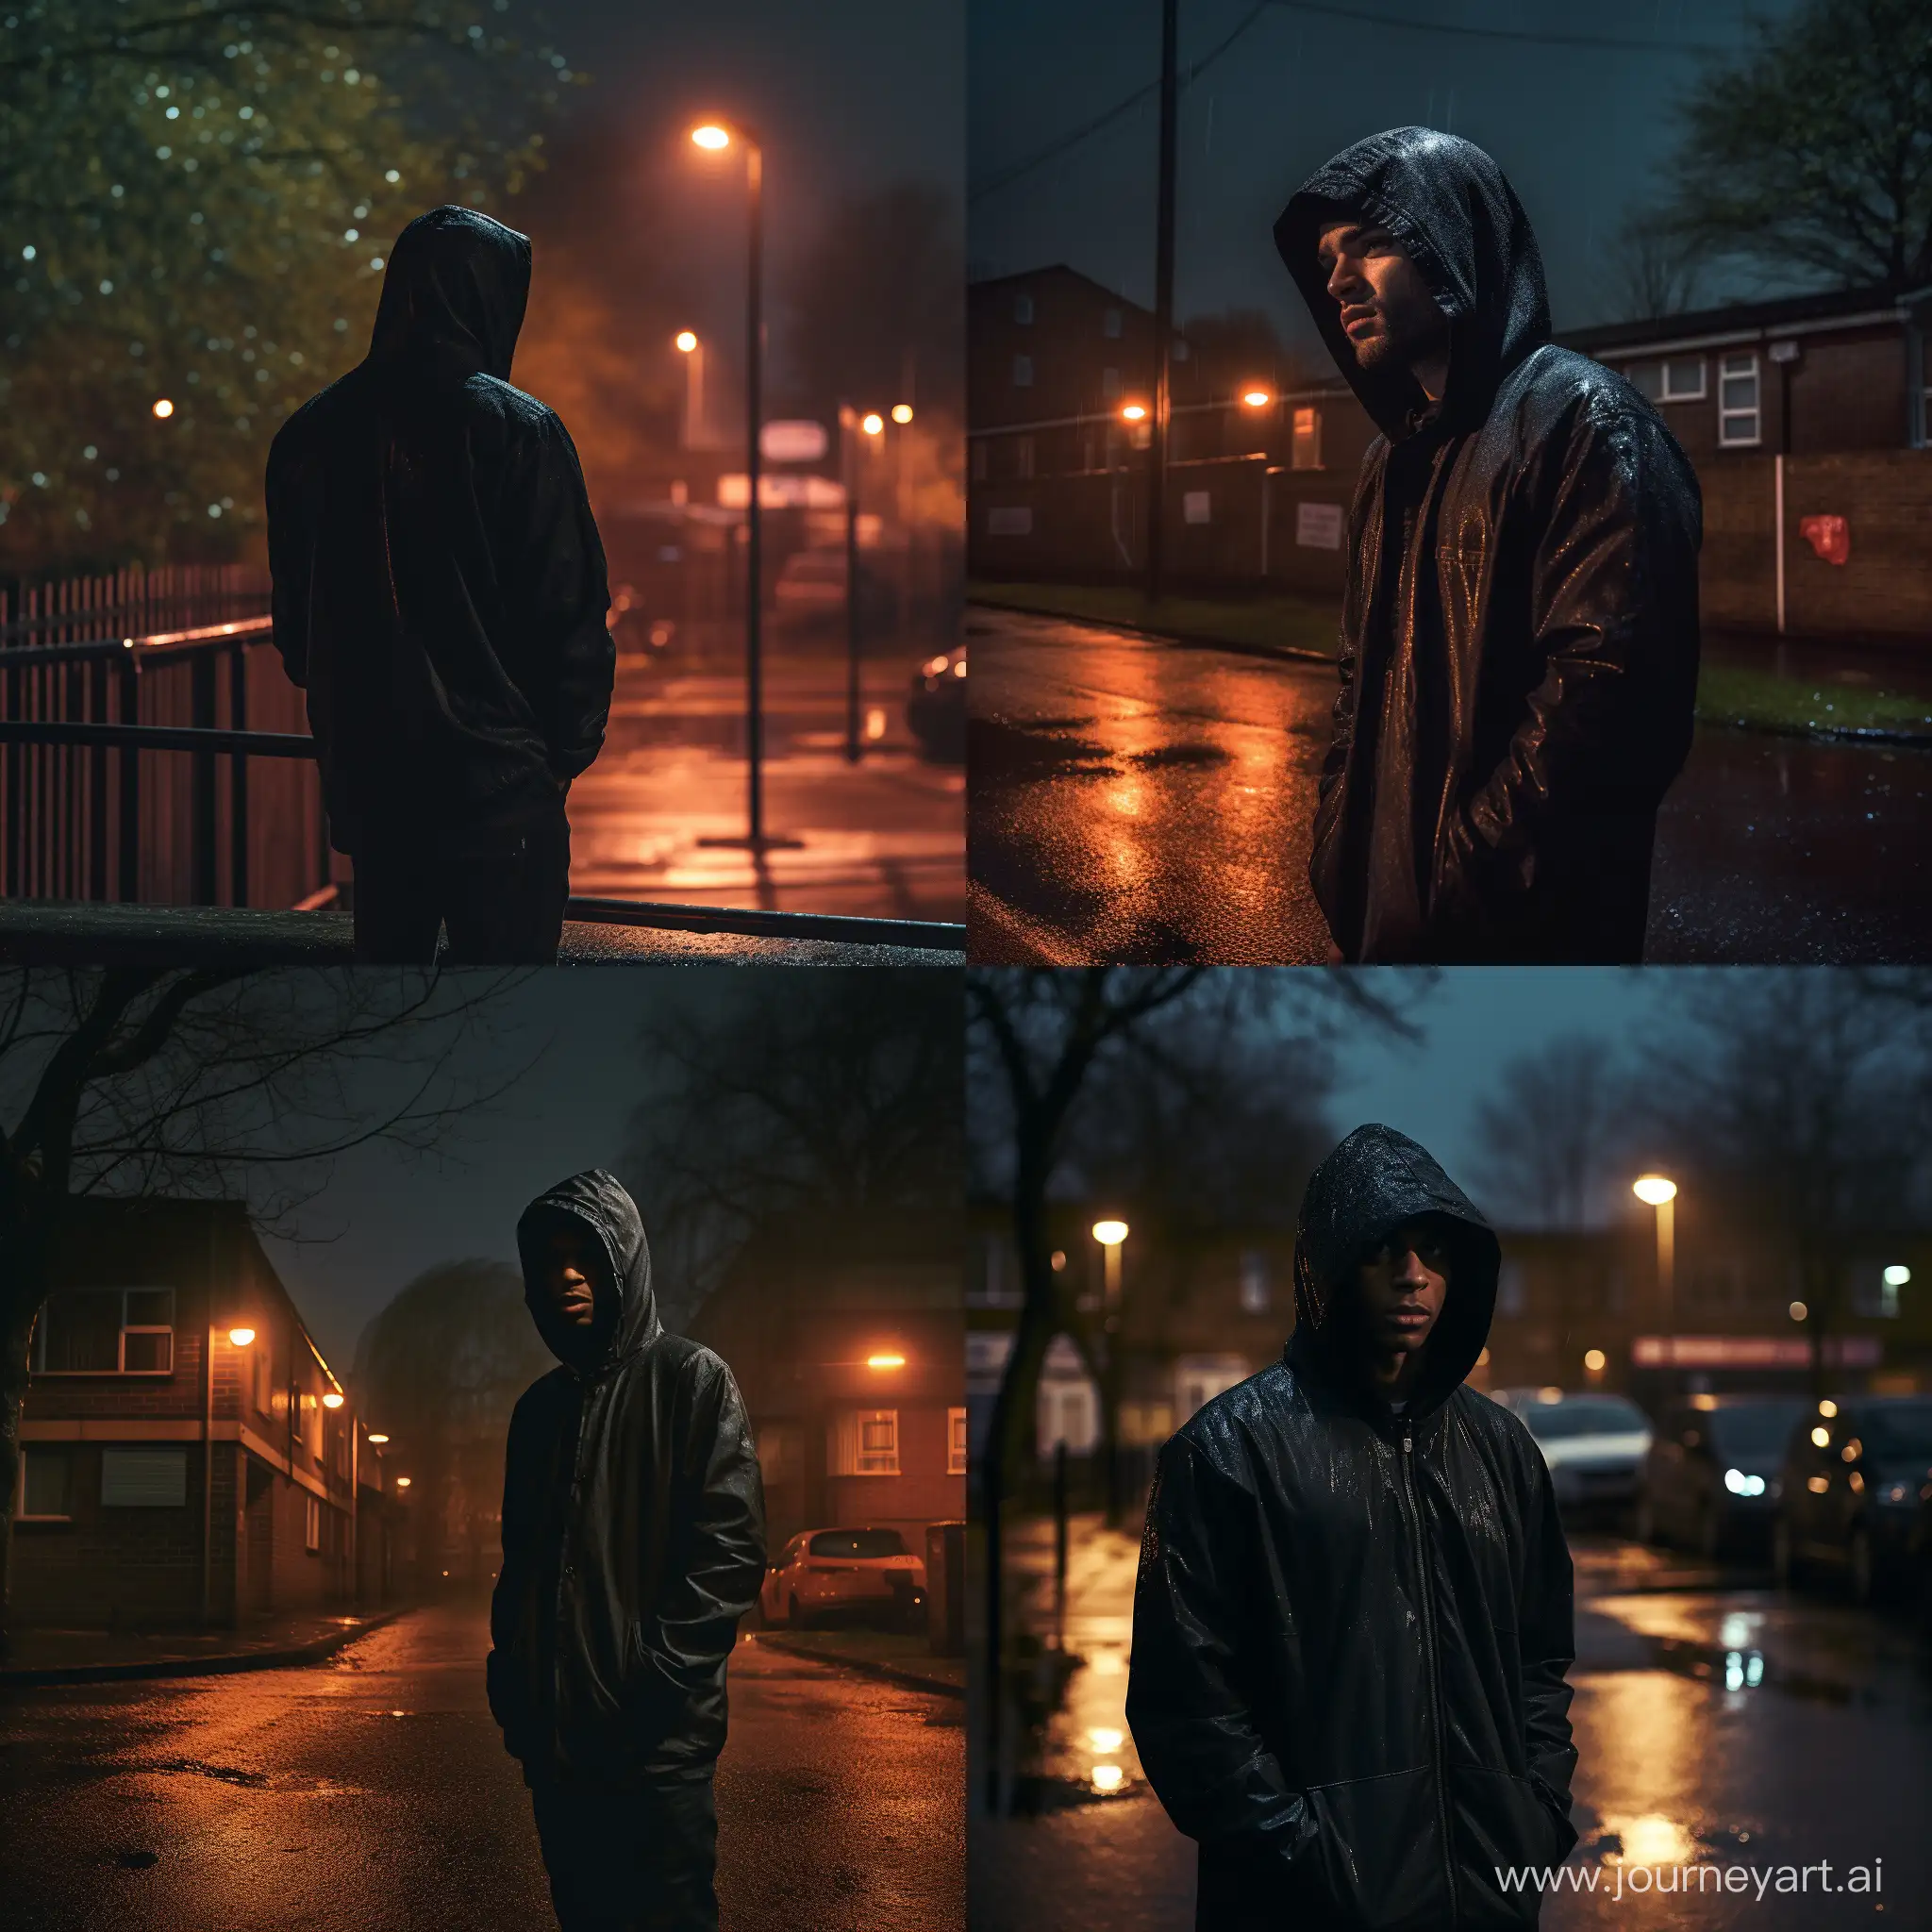 realistic image of a london roadman standing alone by a council estate in london at night, under dimly lit orange streetlights and its raining, he is wearing all black sportswear with his hood up, the vibe is dark and atmospheric and mysterious